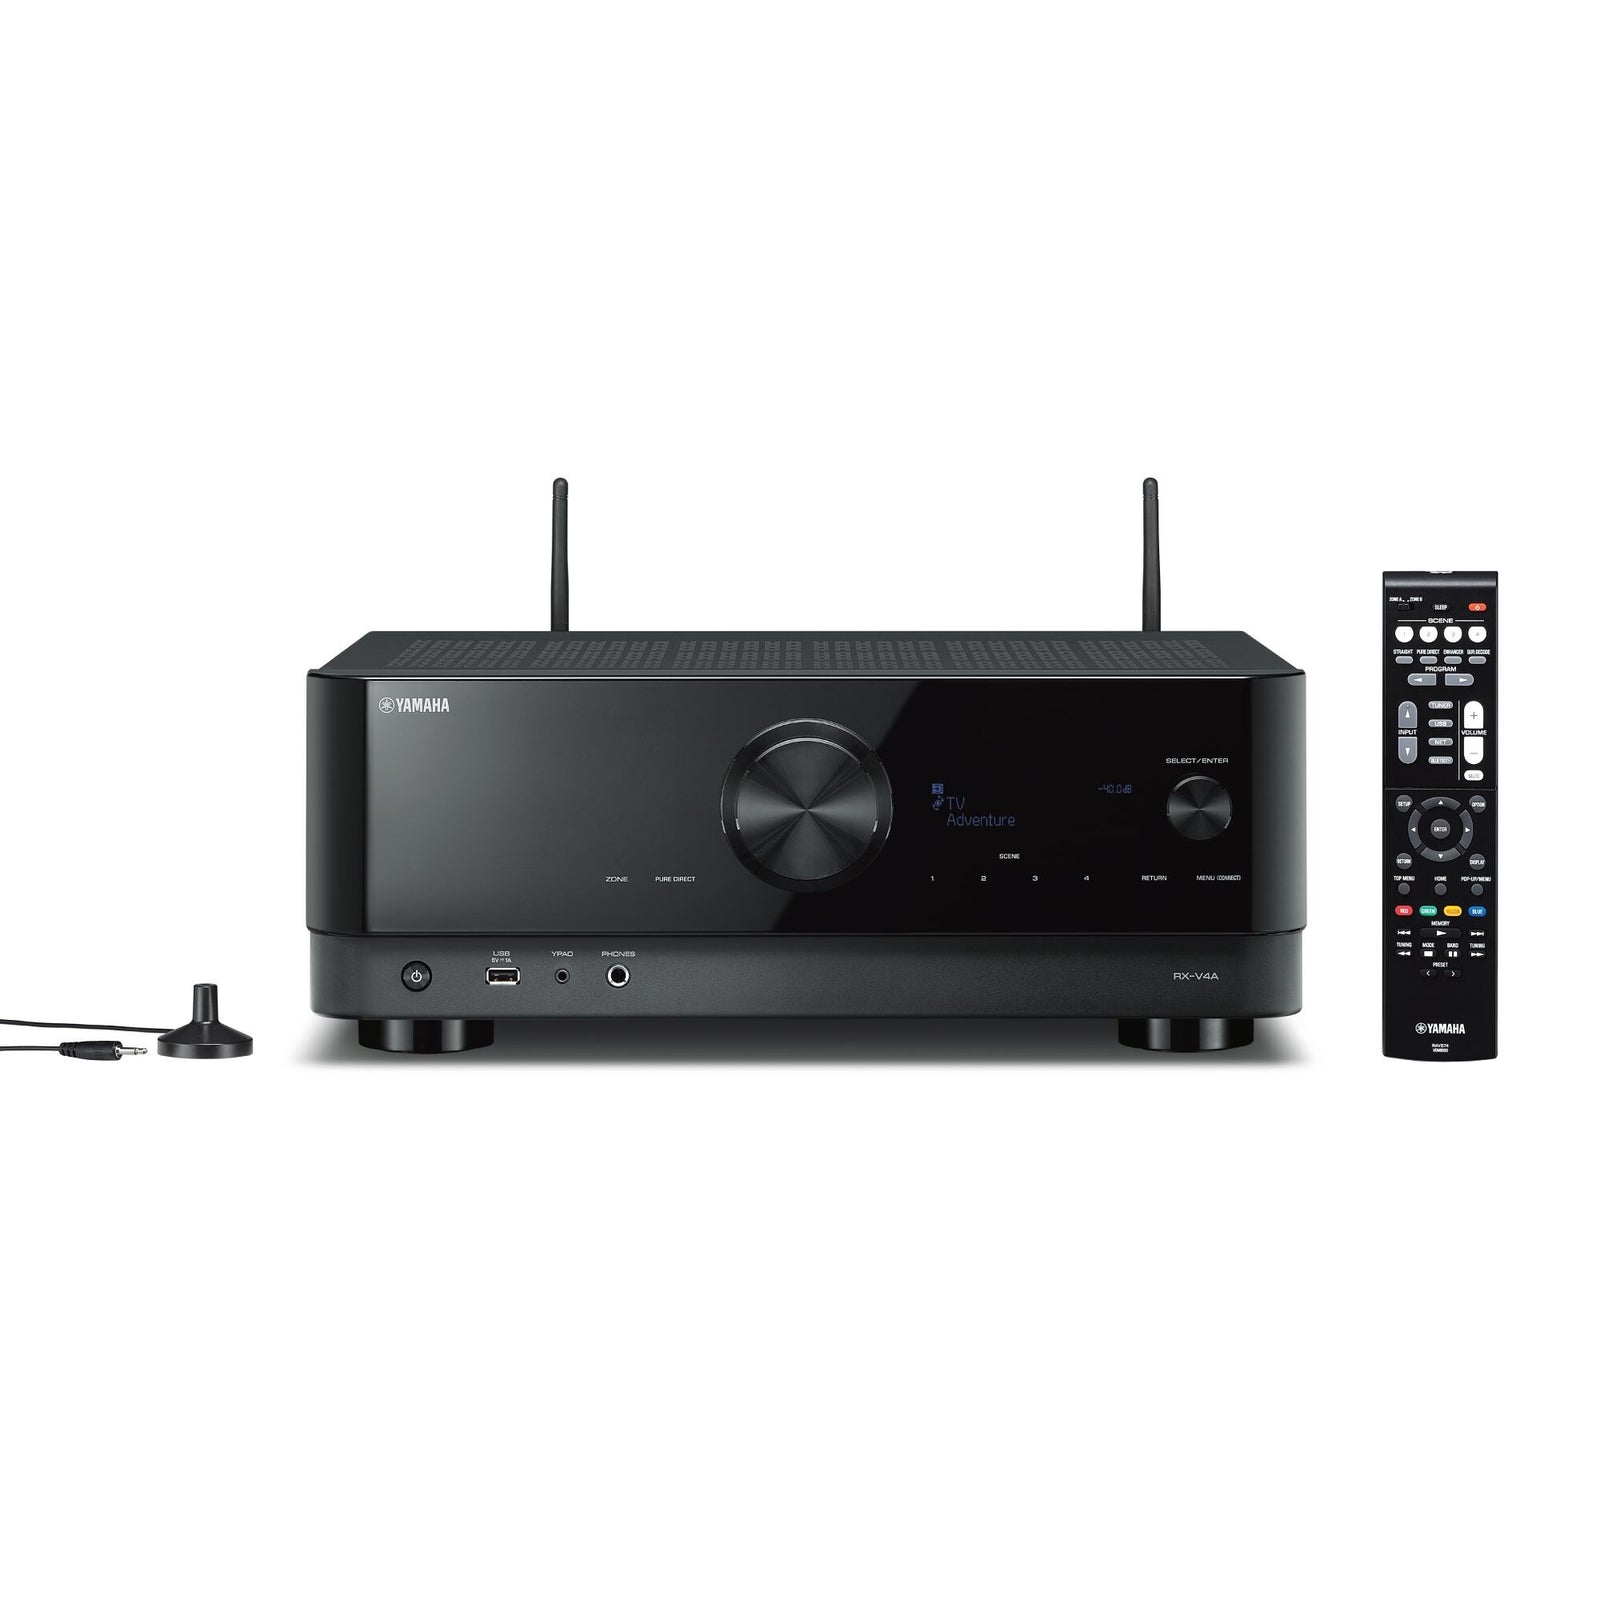 YAMAHA 5.1 CHANNEL MUSICCAST NETWORK HOME THEATER PACKAGE (YHTB4) | VINYL SOUND 80W x 5, 4K120-HDR10+/- RXV4A + 5.1 Speakers (NS51, NSP51, NSSW050) Bring the theater home. This 5.2-channel 80 Watt AV receiver creates a powerful and advanced home theater experience with the latest in video processing and Dolby TrueHD, DTS-HD Master Audio, app control